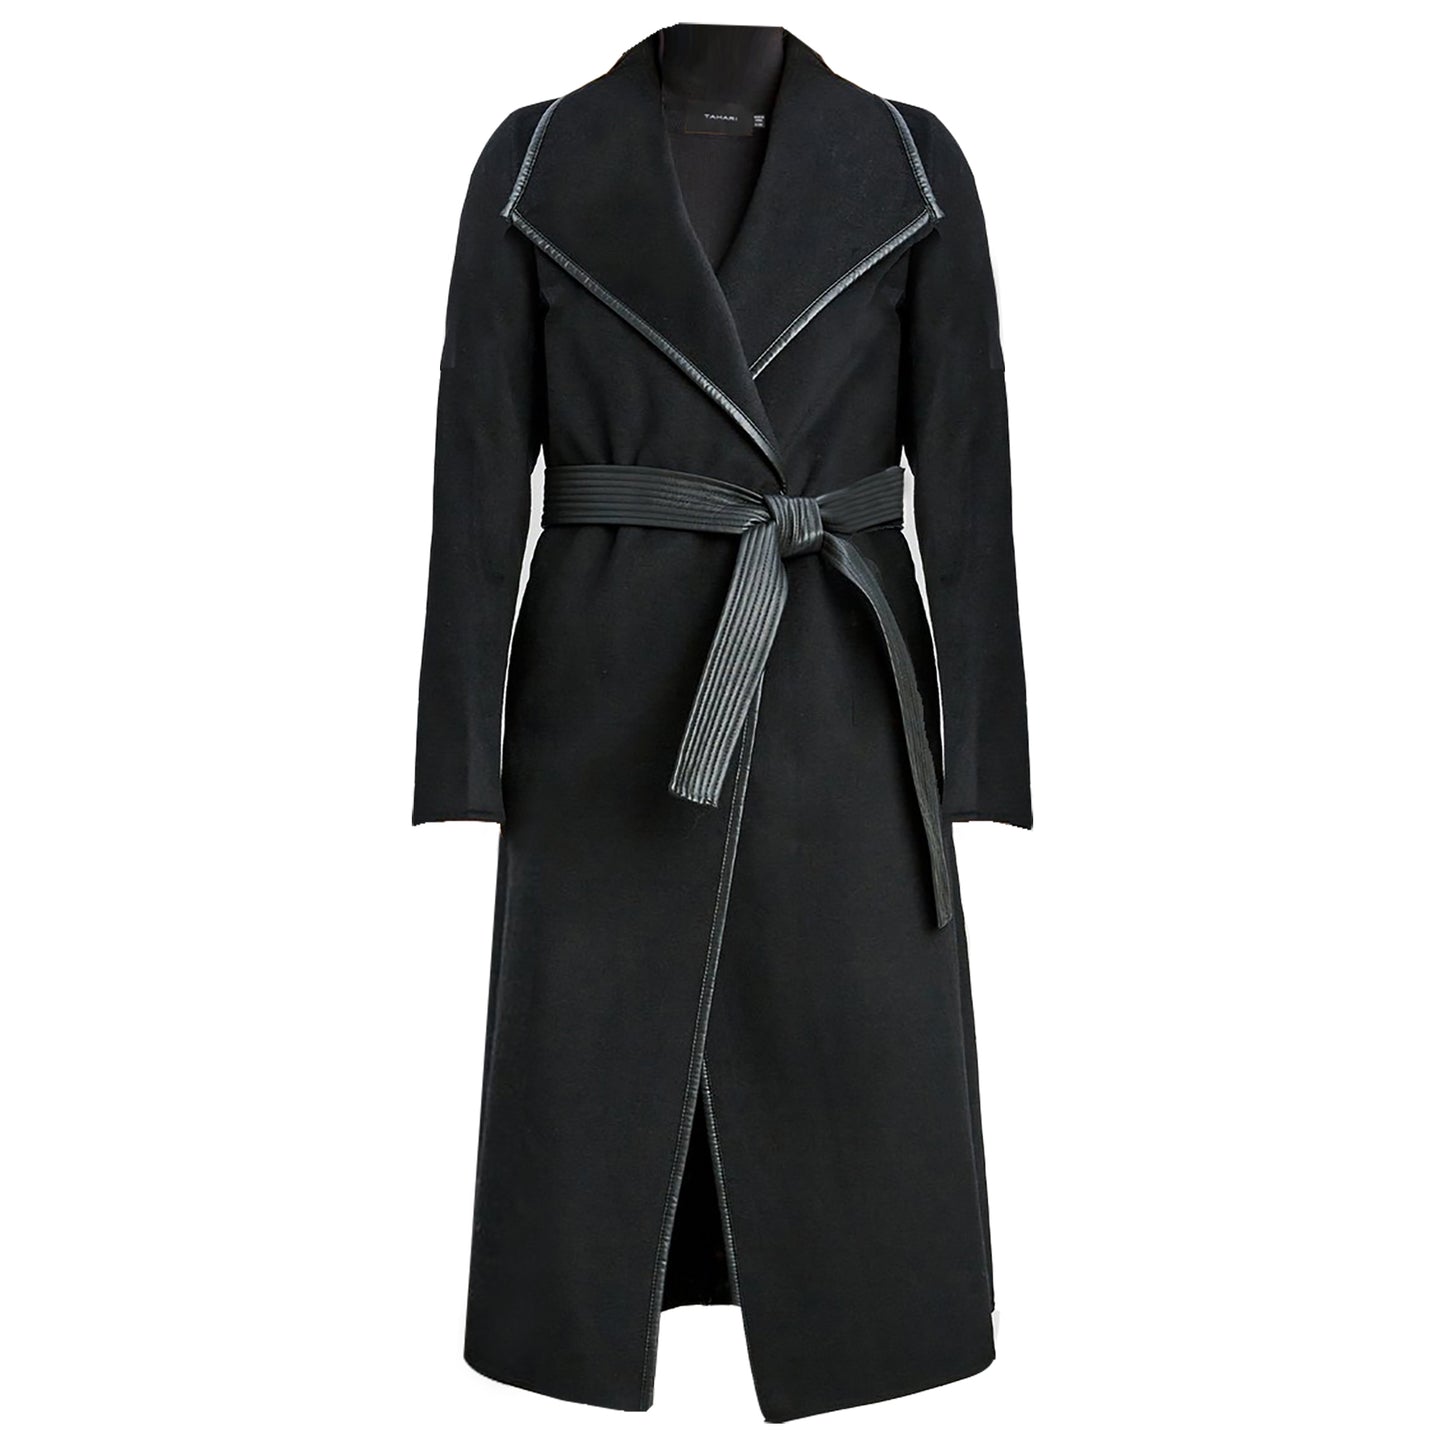 Tahari Women's Black Juliette Double Face Wool Belted Coat with Faux Leather Trim